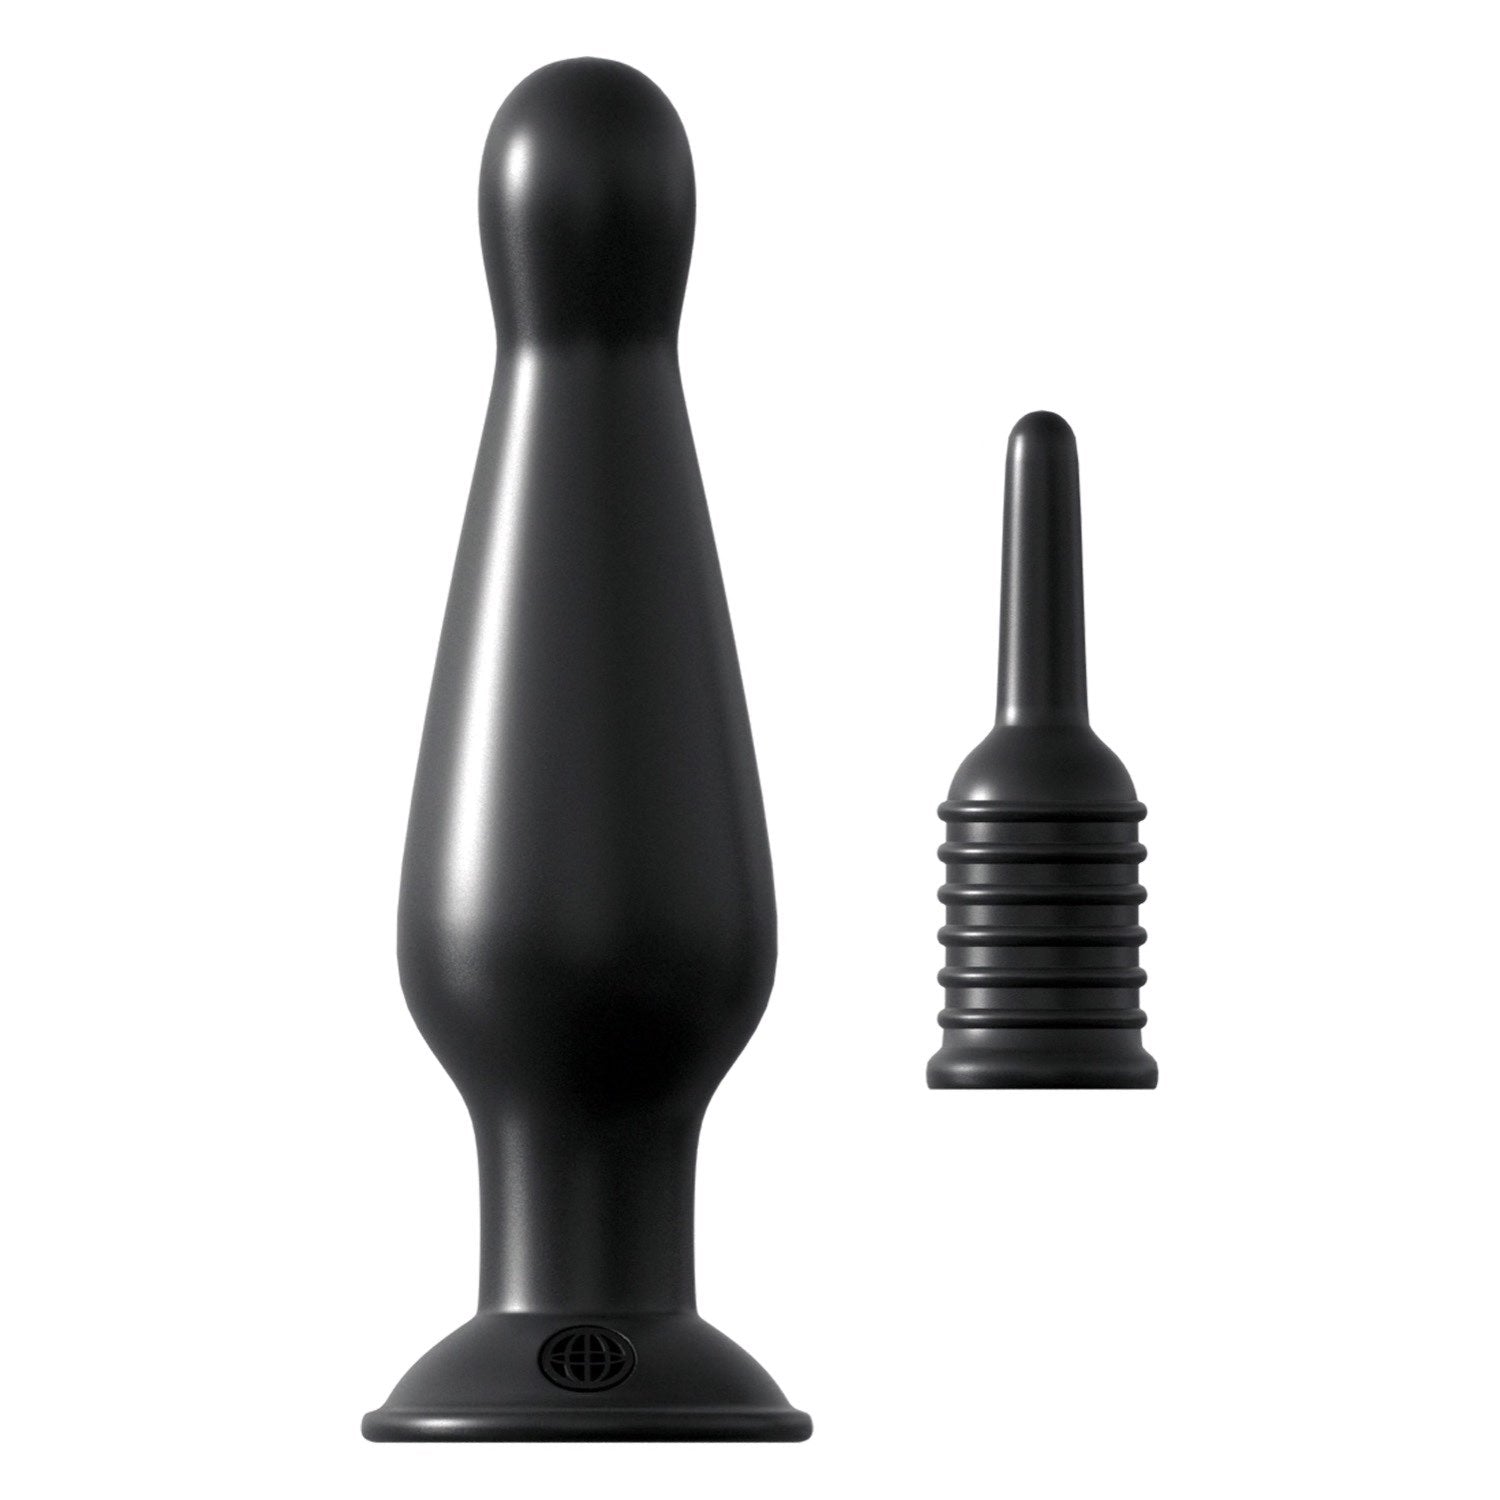 Anal Fantasy Collection Deluxe Fantasy Kit - Black Anal Kit - 7 Piece Set by Pipedream